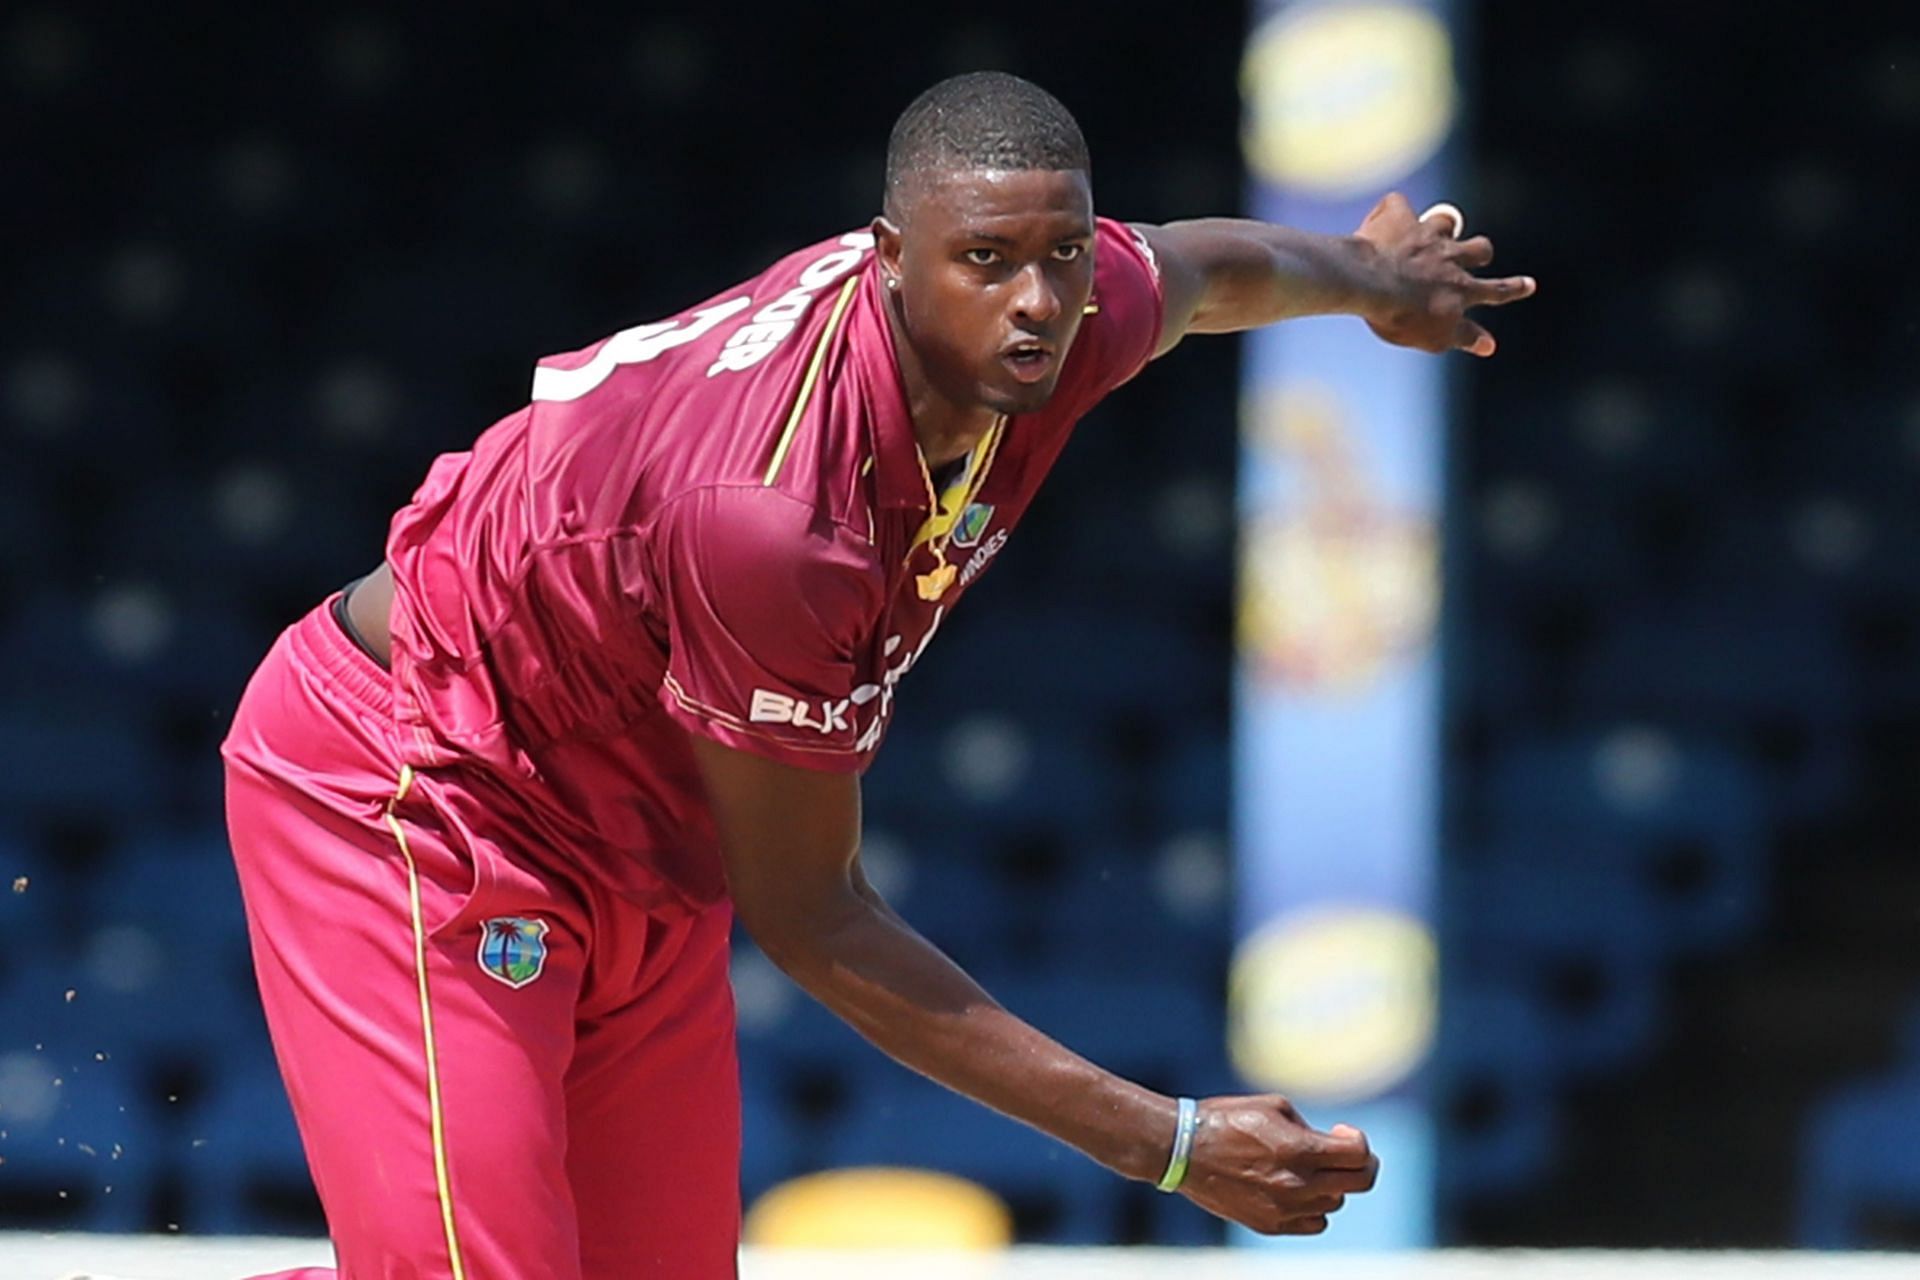 West Indies registered their fifth win of the ICC Cricket World Cup Super League